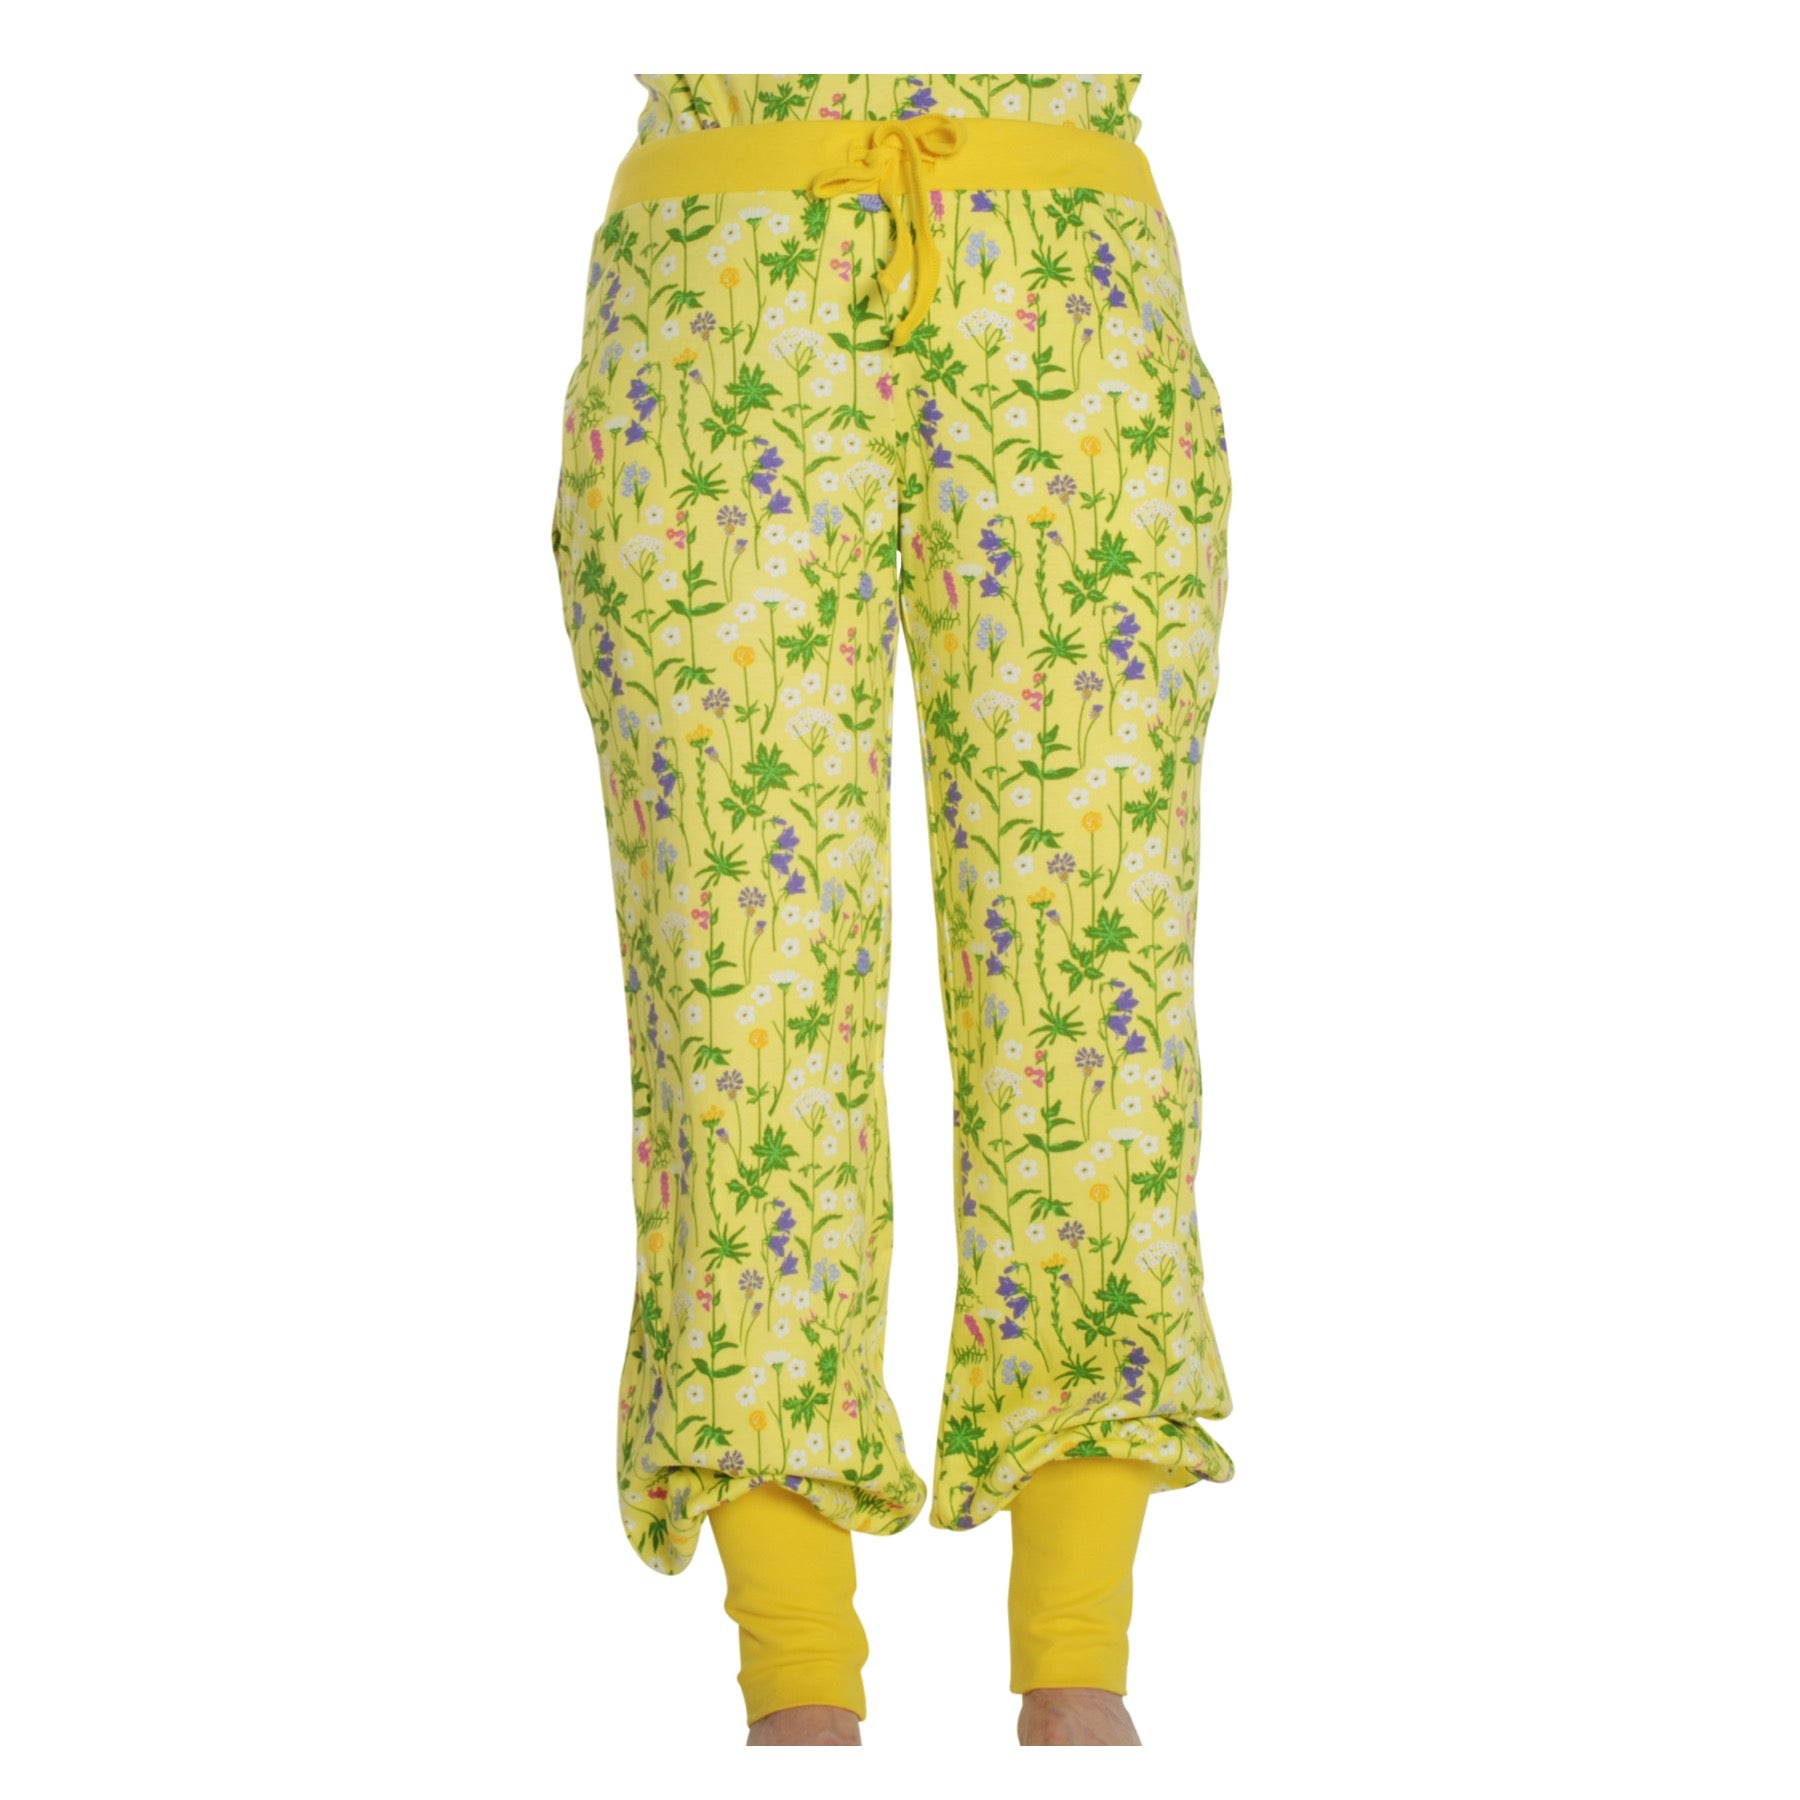 DUNS Sweden Baggy Pants Wild Flowers Yellow (Adult)